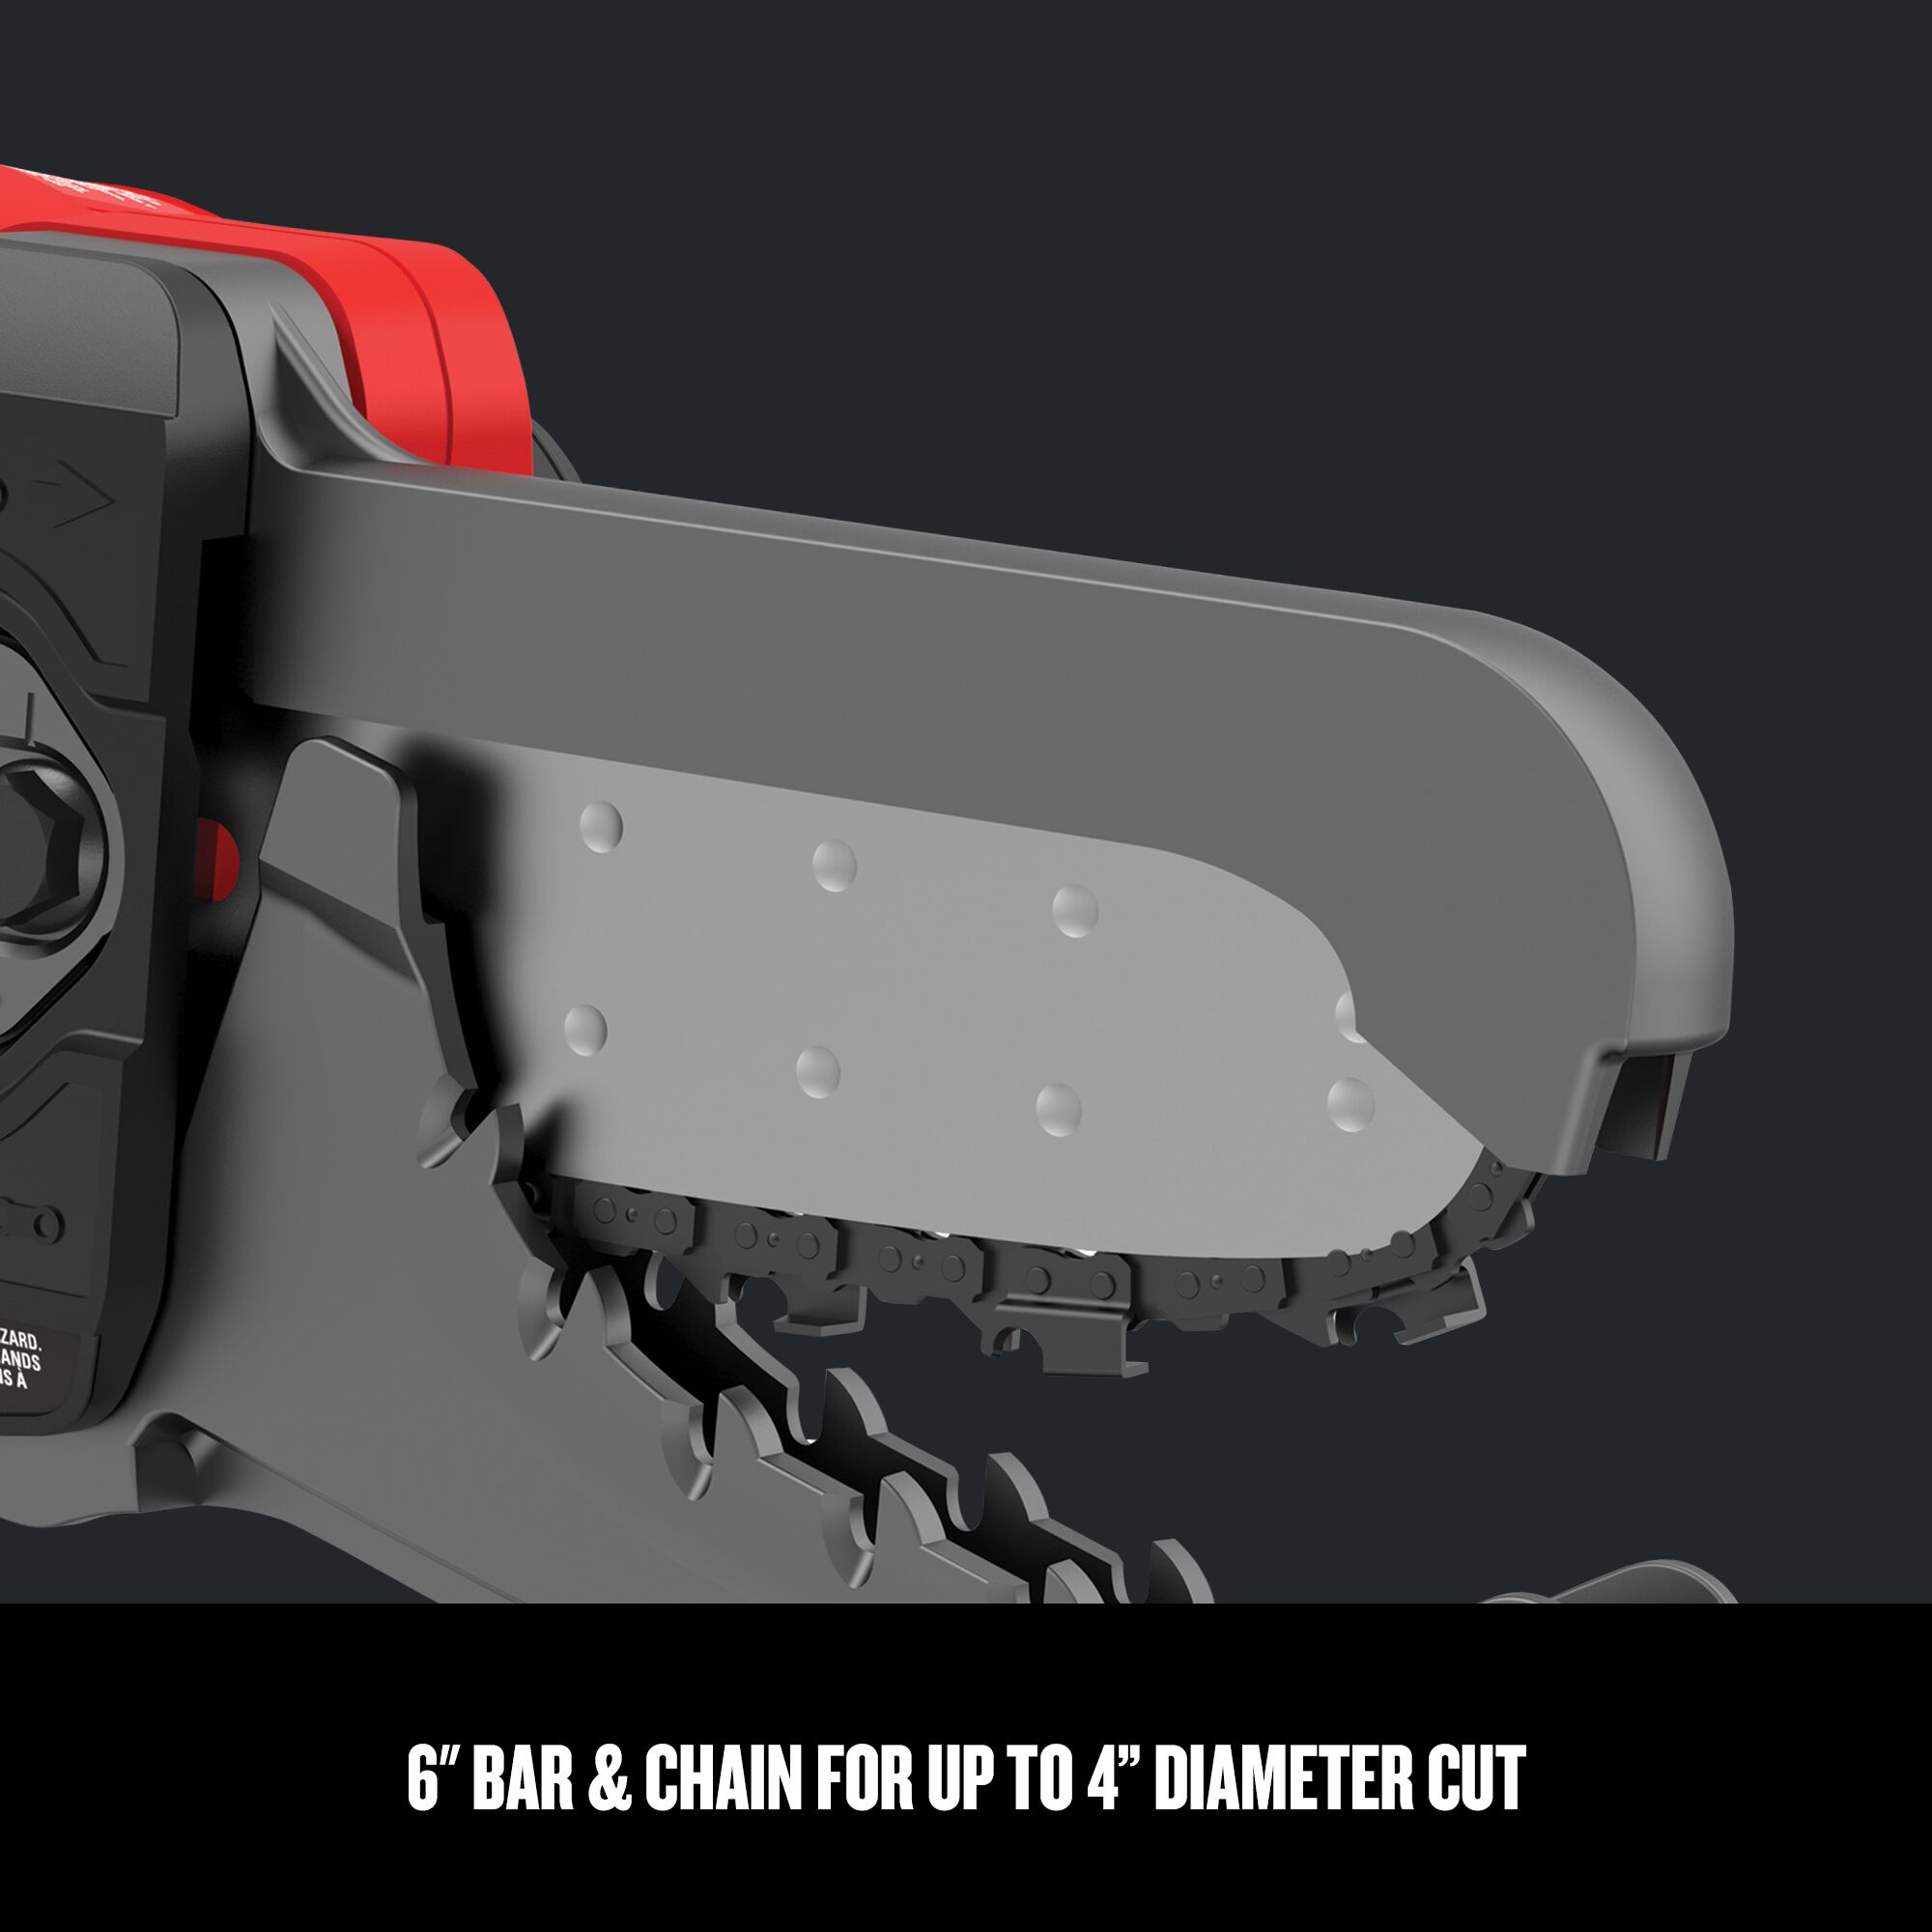 Graphic of CRAFTSMAN Loppers highlighting product features